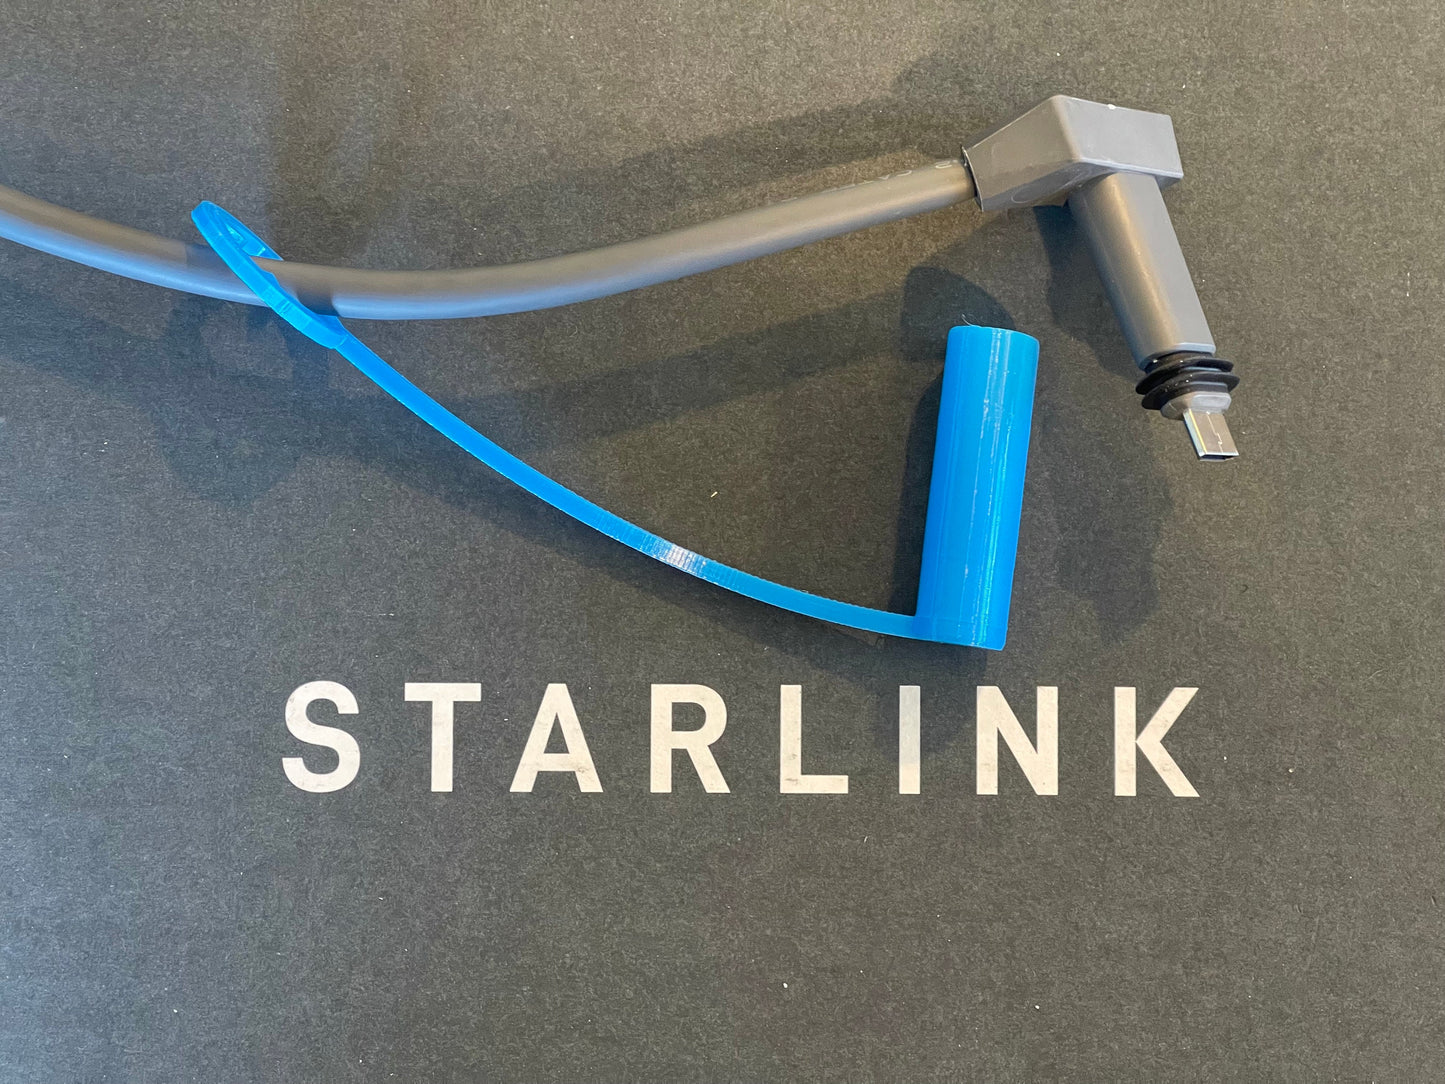 Starlink Cable Router Plug Protectors Cover With Tether - Free Shipping